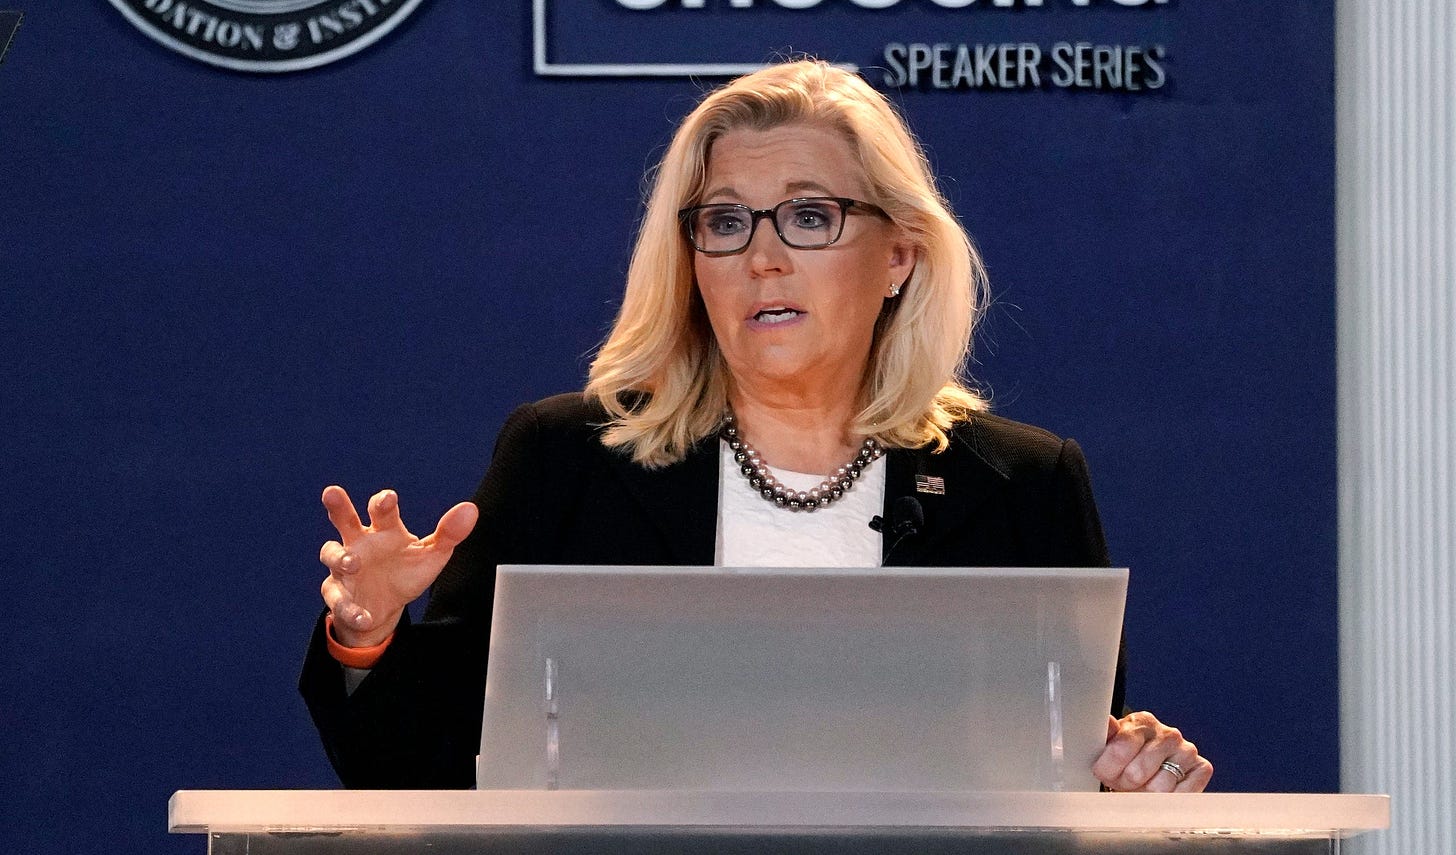 Rep. Liz Cheney, R-Wyo., vice-chair of the House Select Committee investigating the Jan. 6 U.S. Capitol insurrection, delivers her "Time for Choosing" speech at the Ronald Reagan Presidential Library and Museum in Simi Valley, California, on Wednesday.